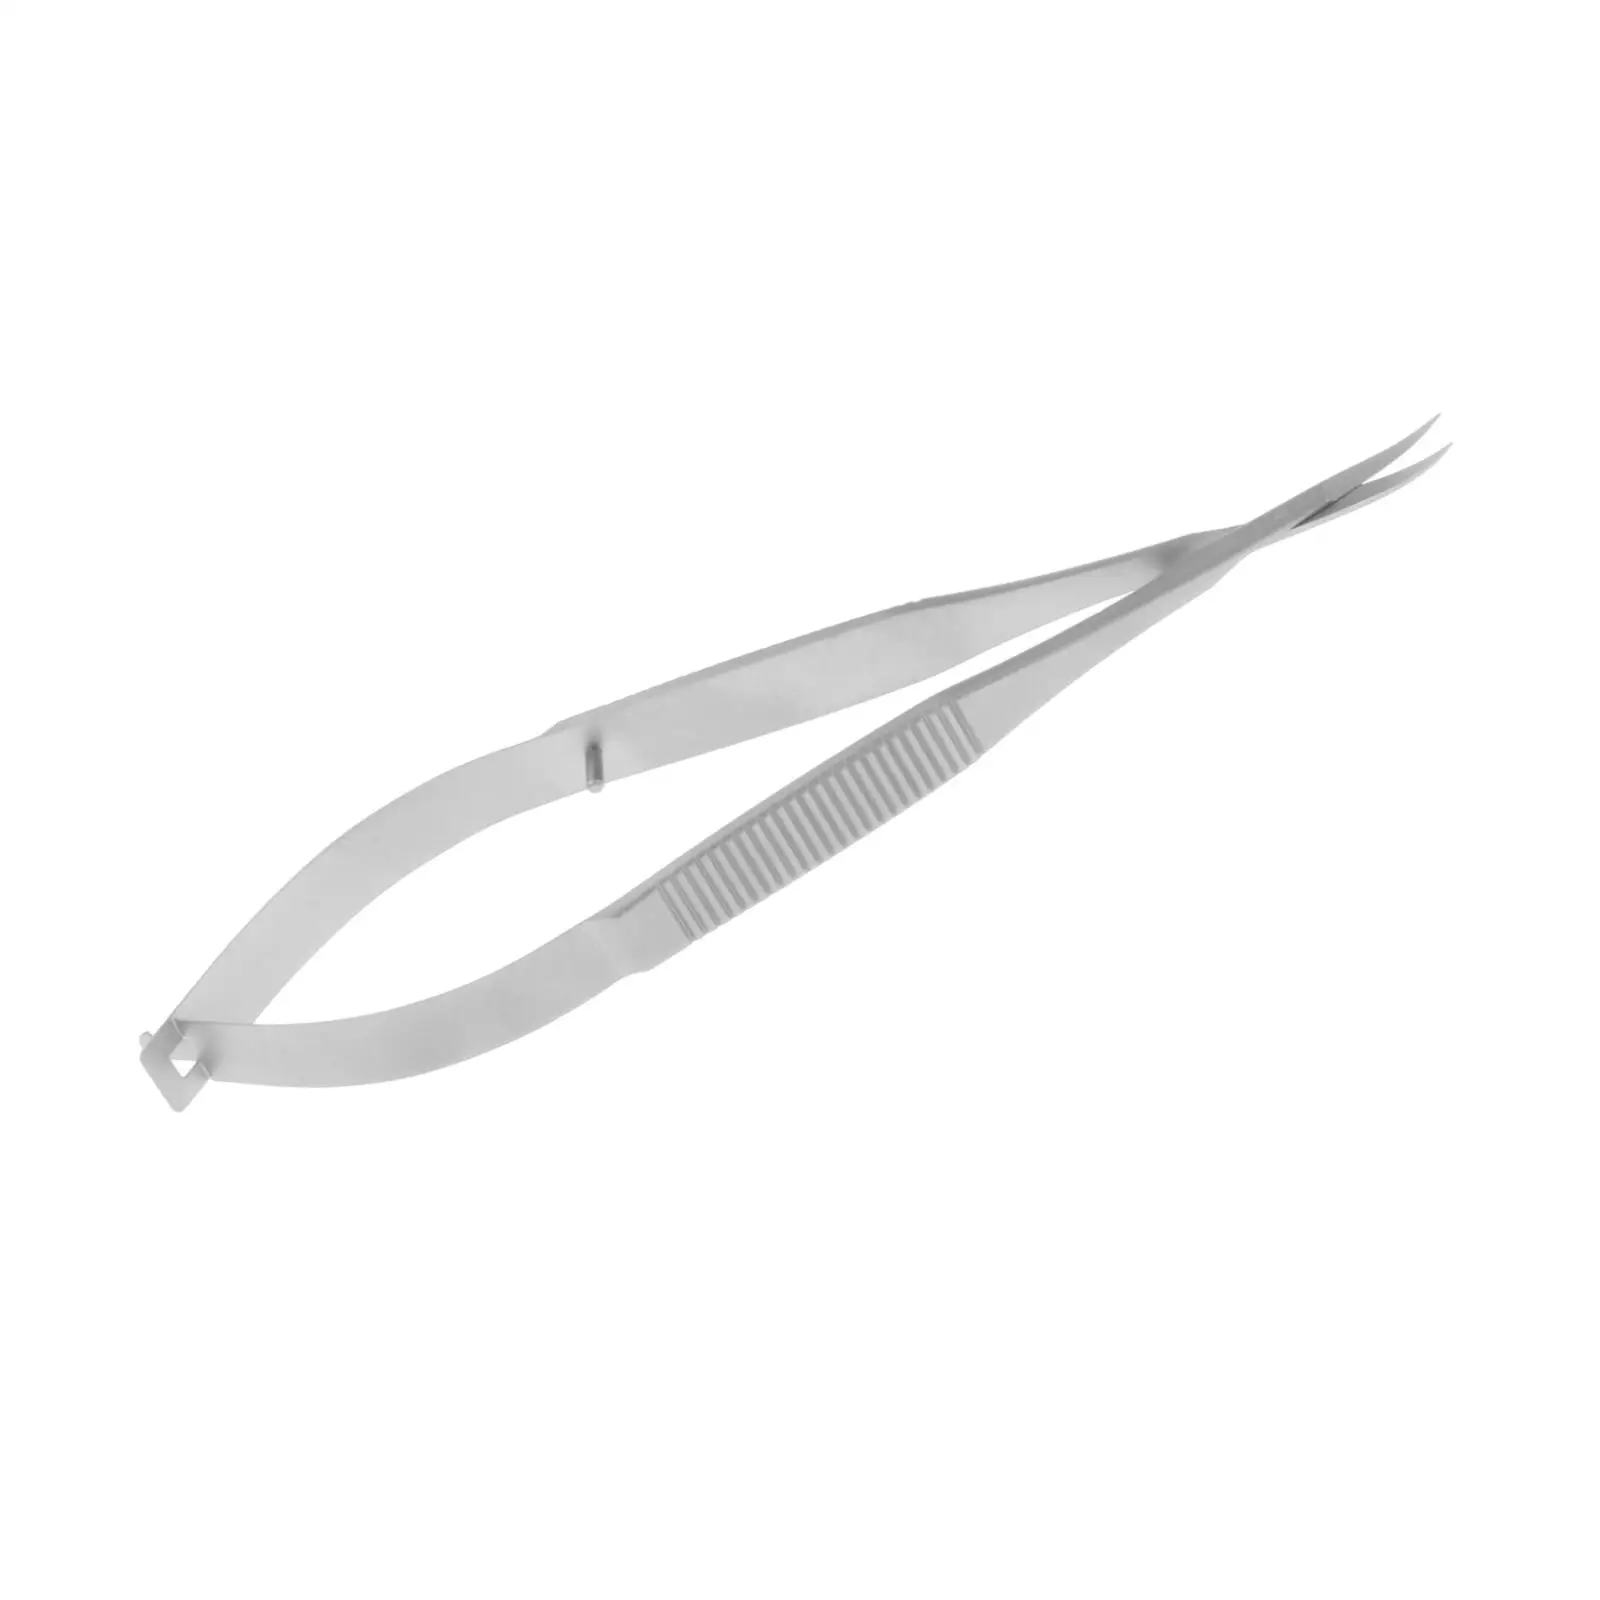 Curved Scissors Manicure Professional Facial Hair Scissors for Men Mustache Nose Hair &Beard Trimming Scissors Safety Use